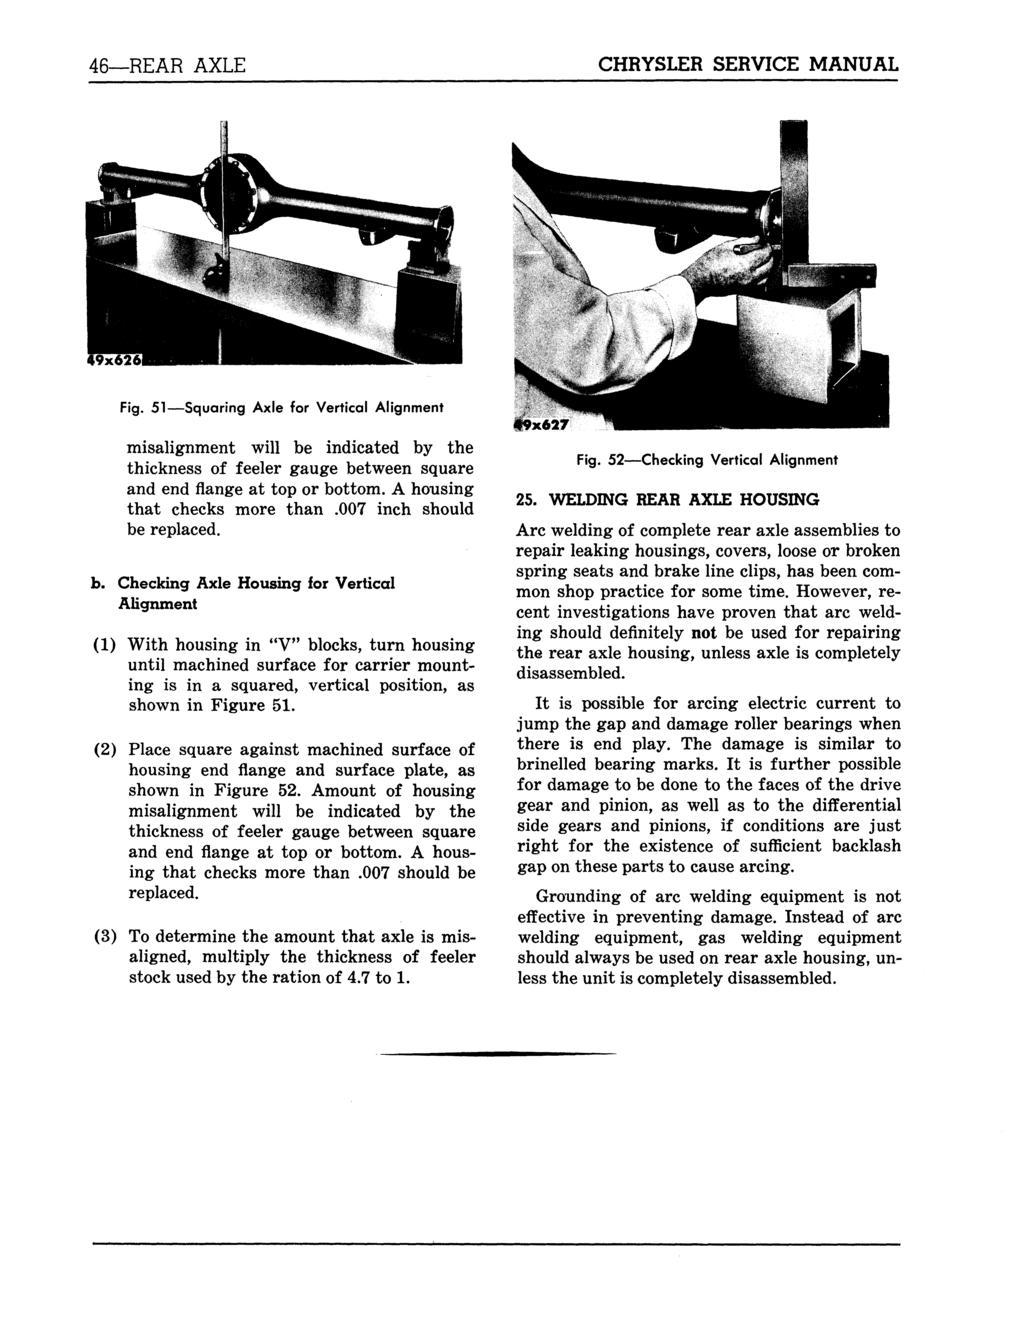 46 REAR AXLE CHRYSLER SERVICE MANUAL Fig. 51 Squaring Axle for Vertical Alignment misalignment will be indicated by the thickness of feeler gauge between square and end flange at top or bottom.